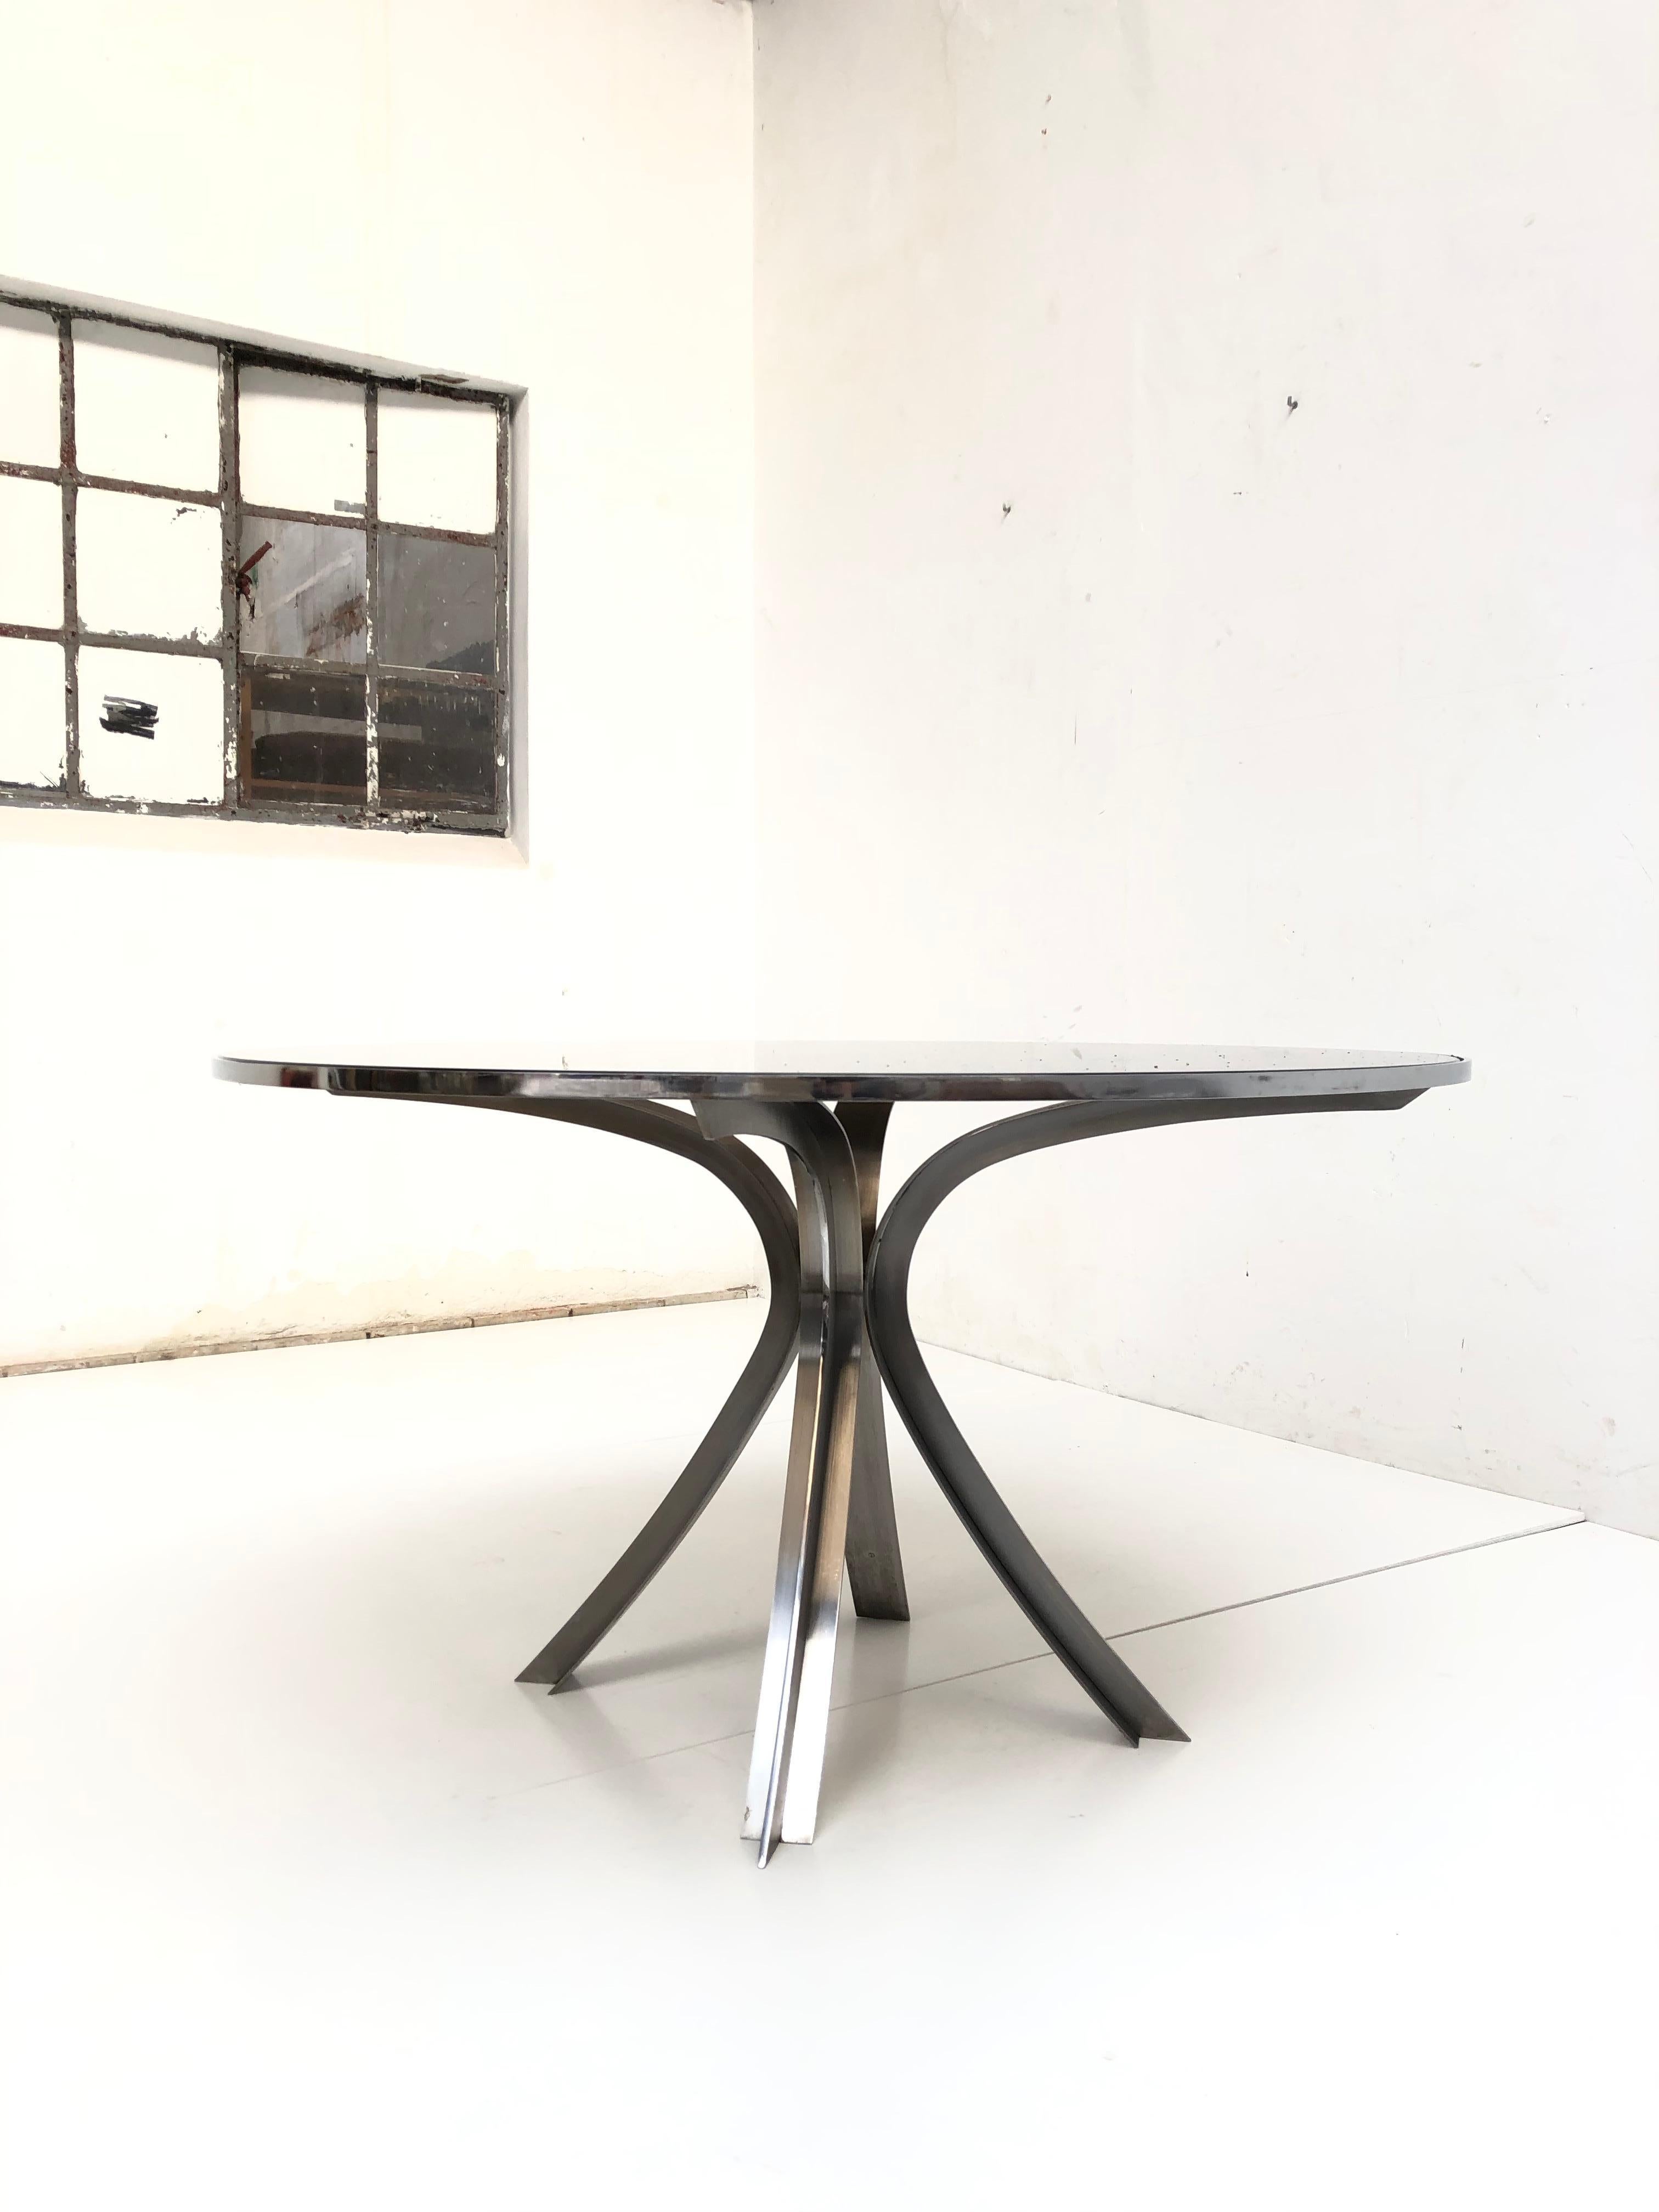 Late 20th Century Sculptural Stainless Steel Smoked Glass Dining Table by Xavier Féal 1970, France